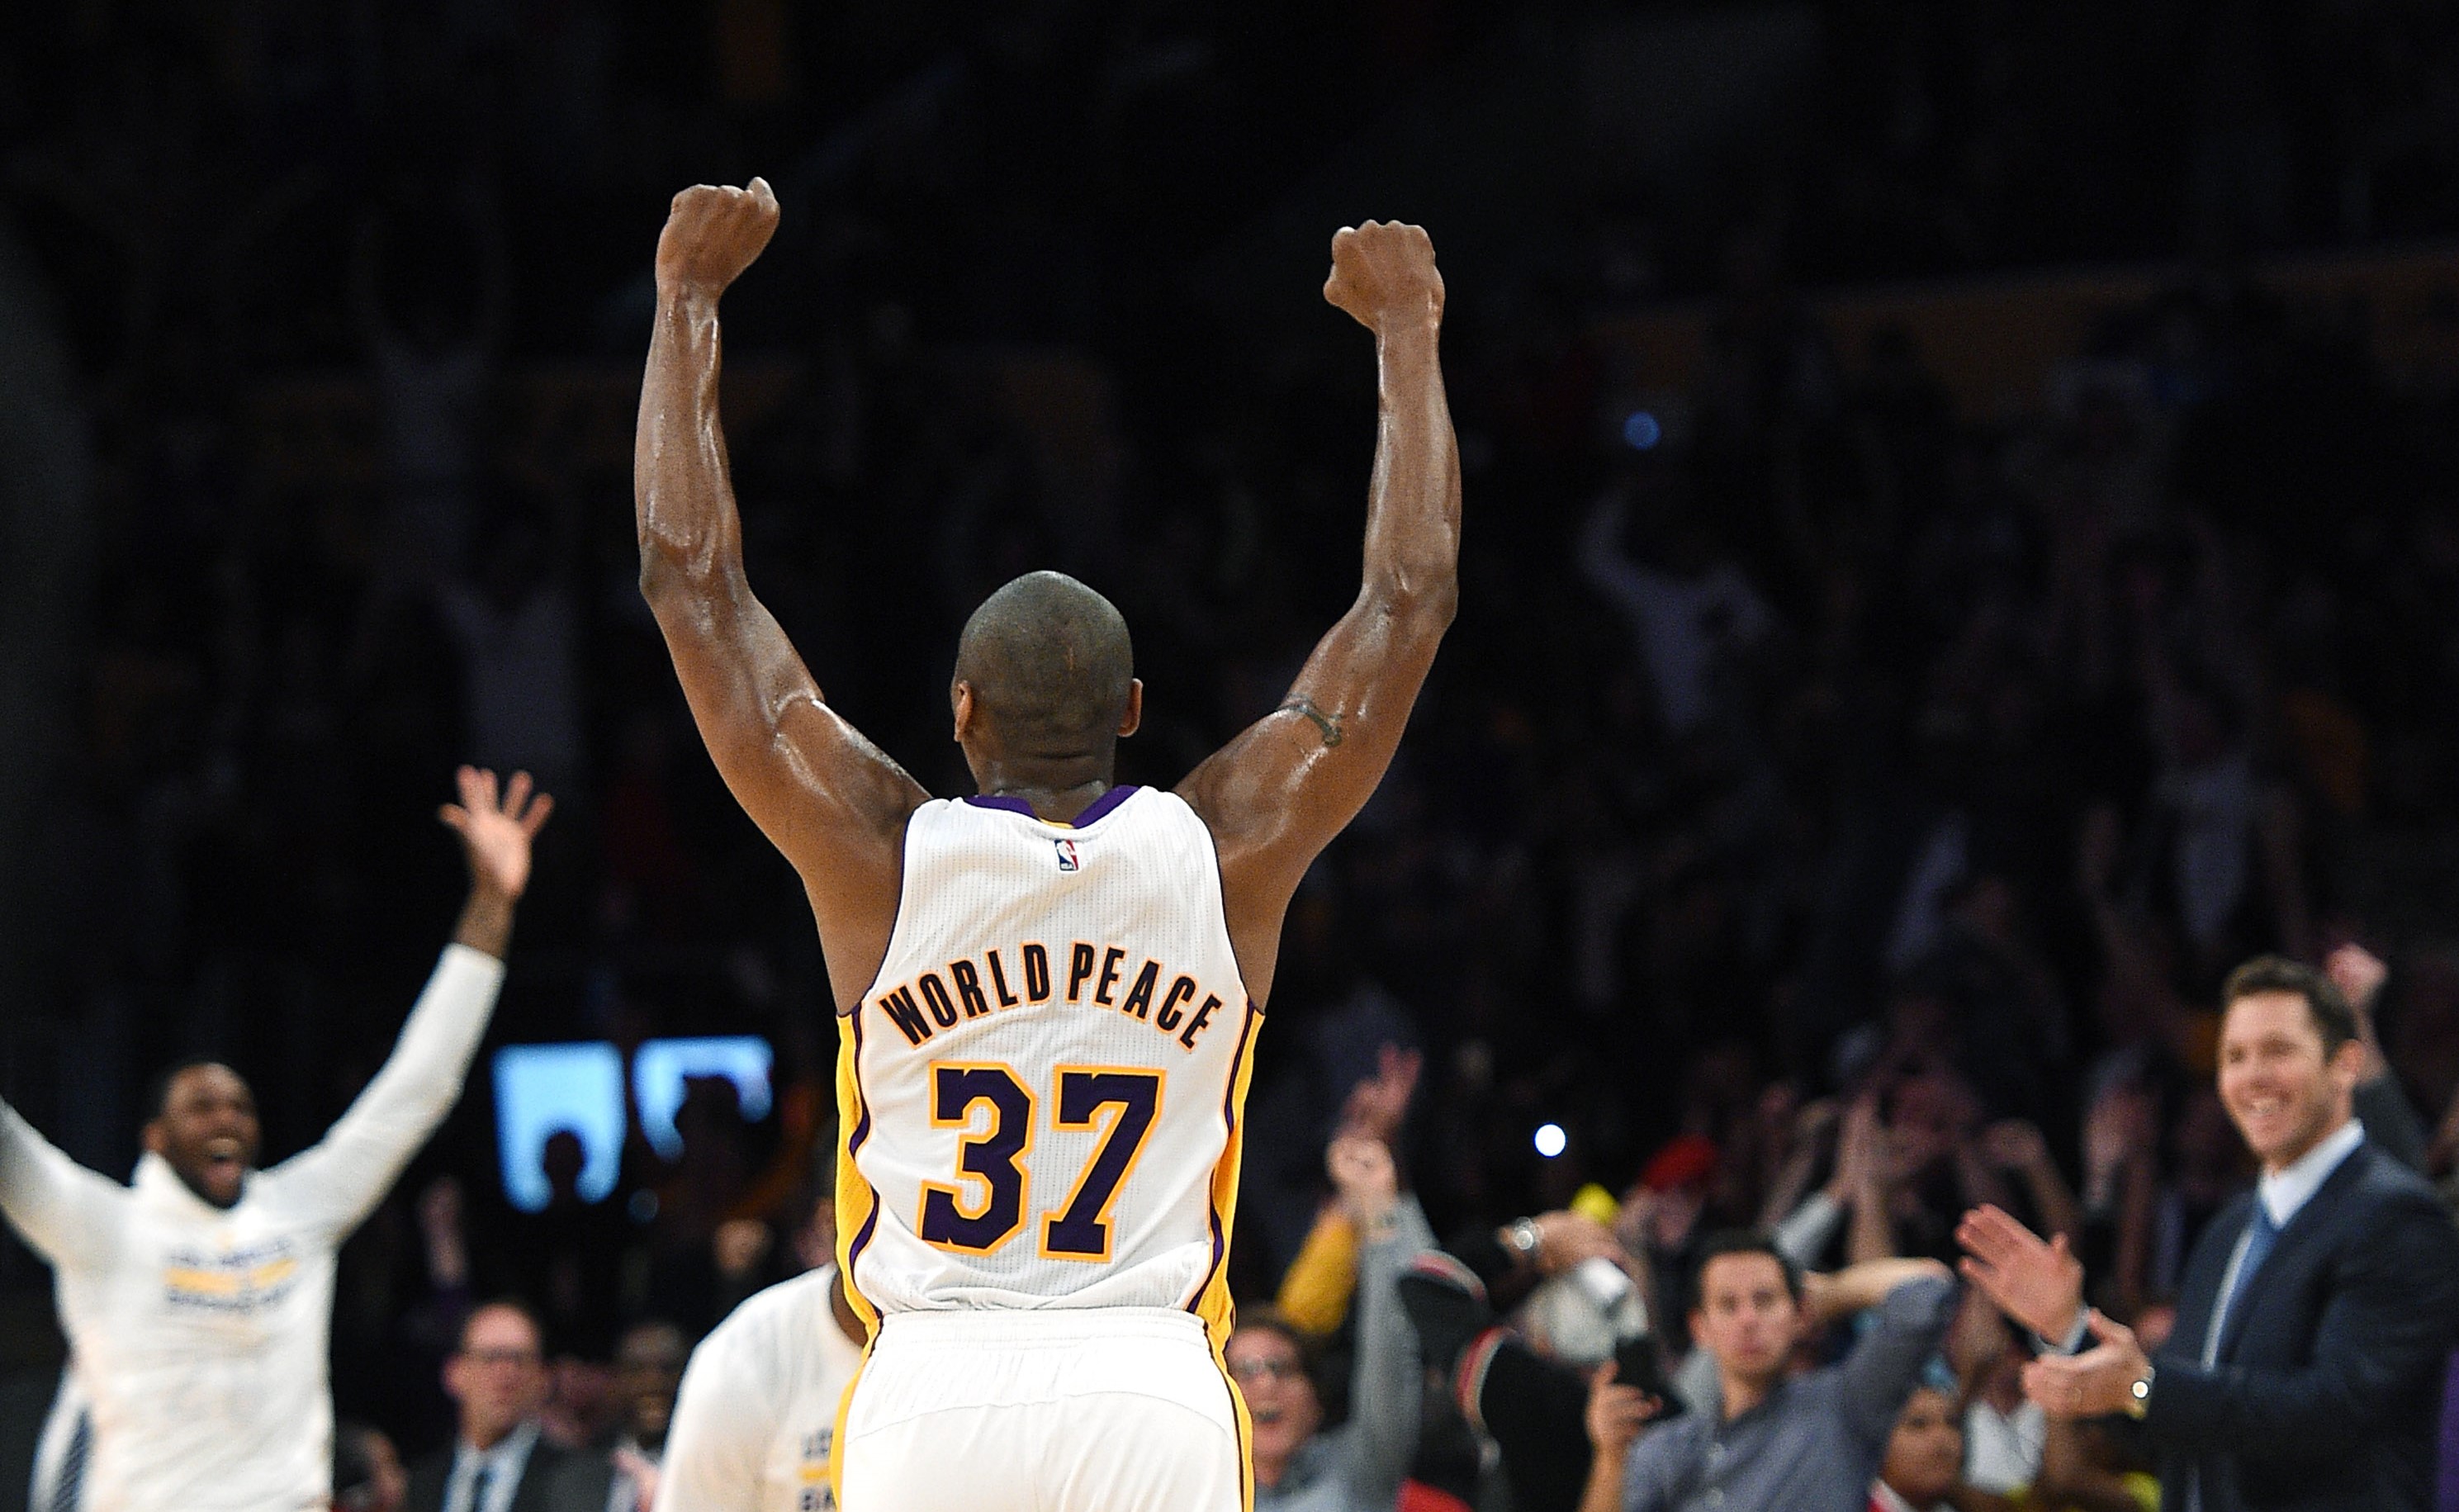 Metta World Peace of the Los Angeles Lakers celebrates the buzzer-beating three-point basket by teammate D'Angelo Russell.